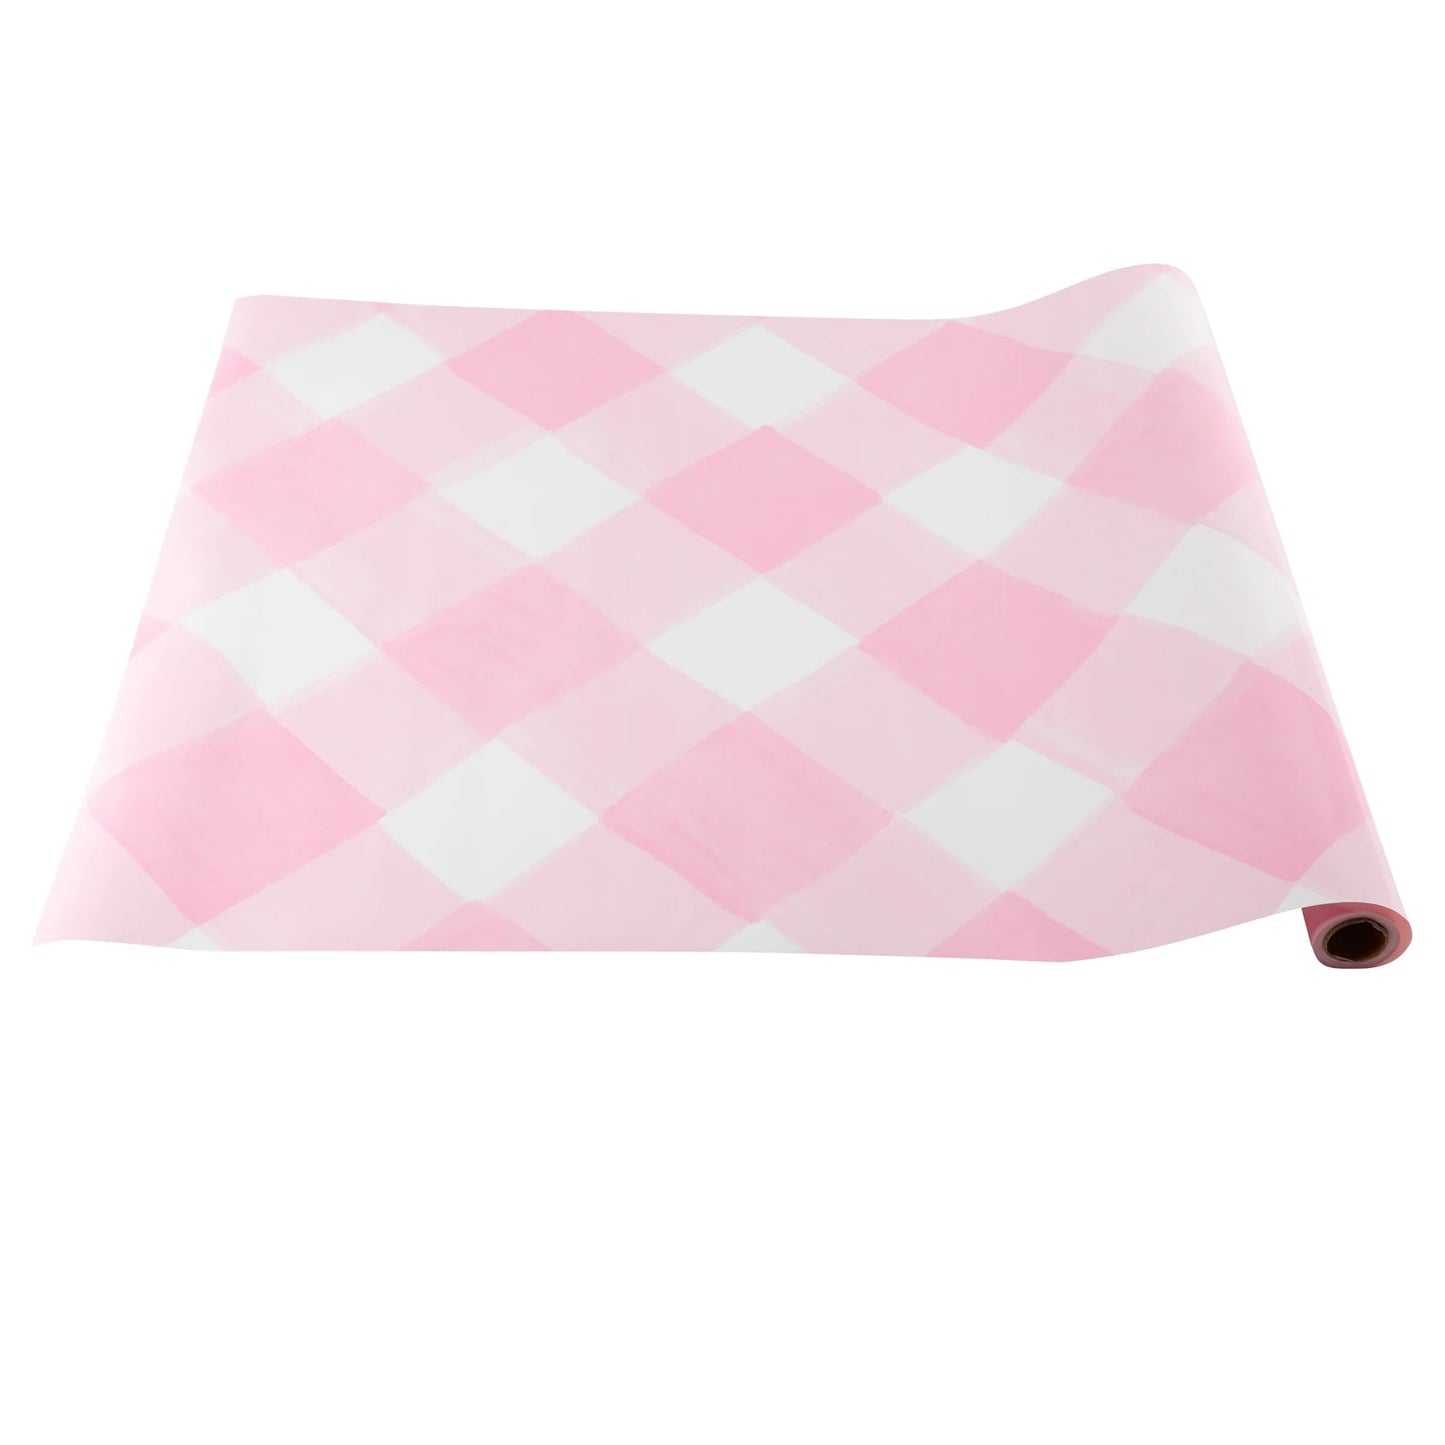 Deck the Halls, Y'all Paper Table Runner: Pink Gingham